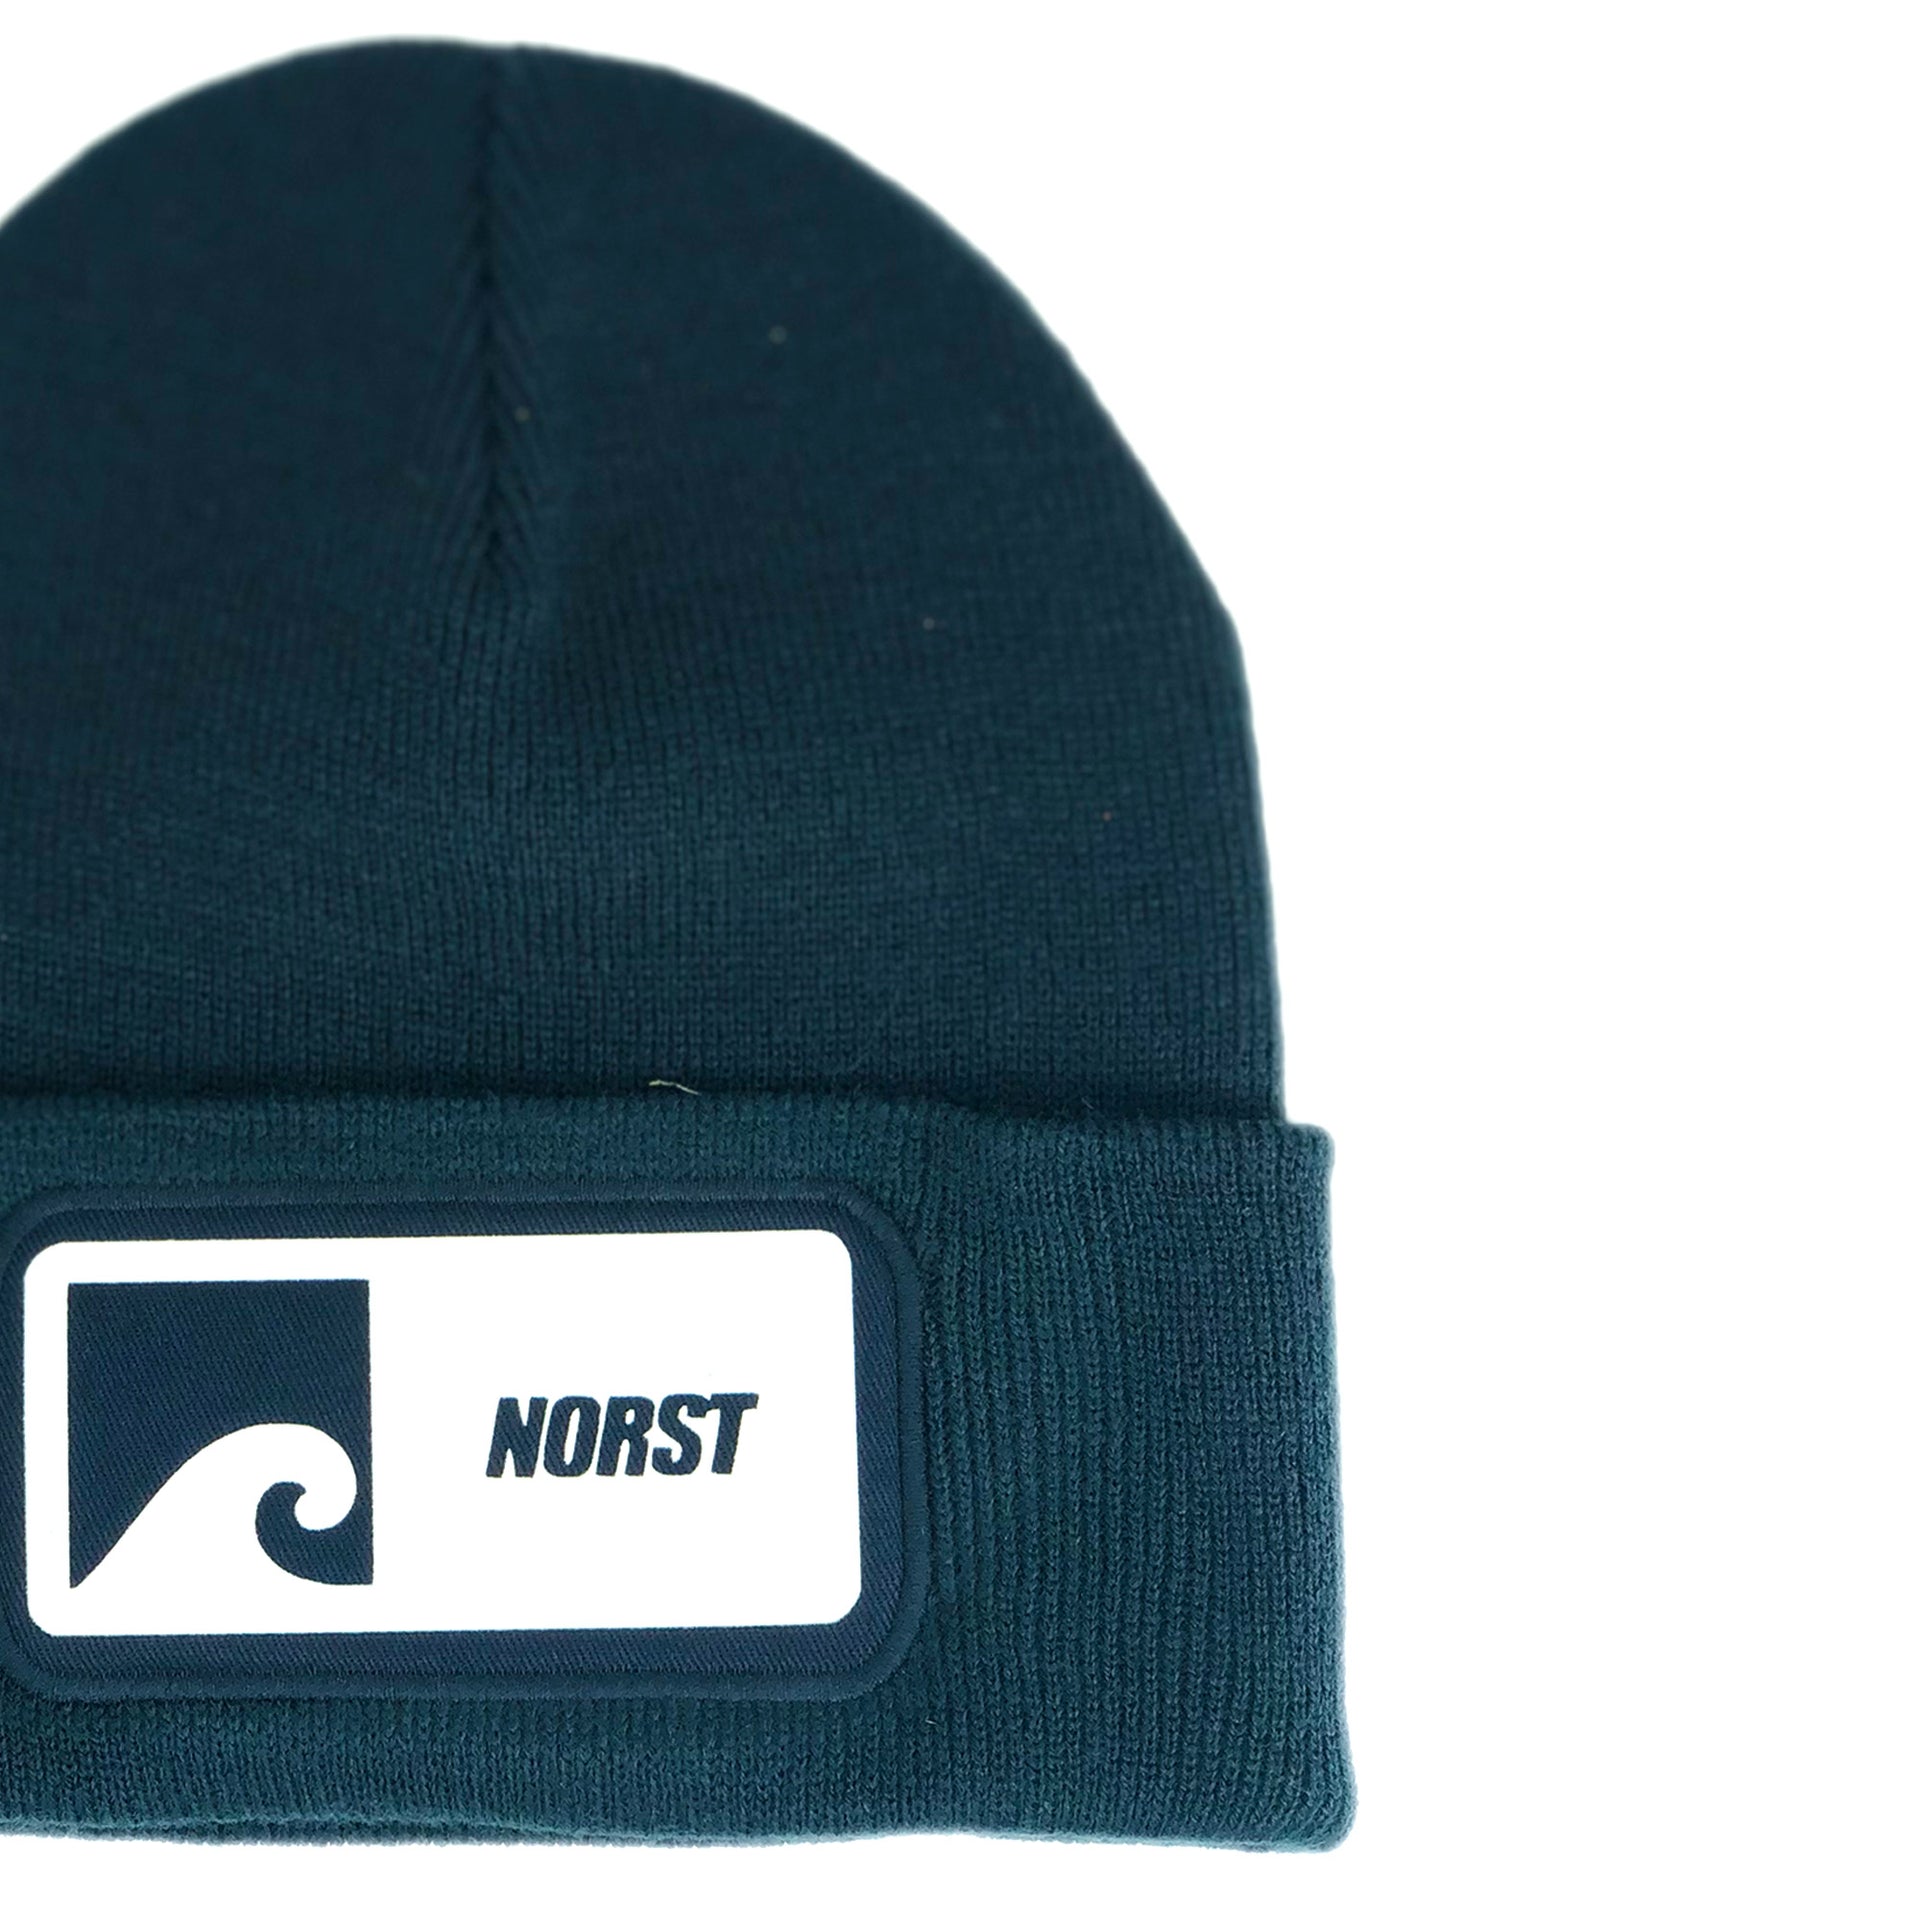 Beanies by Norst